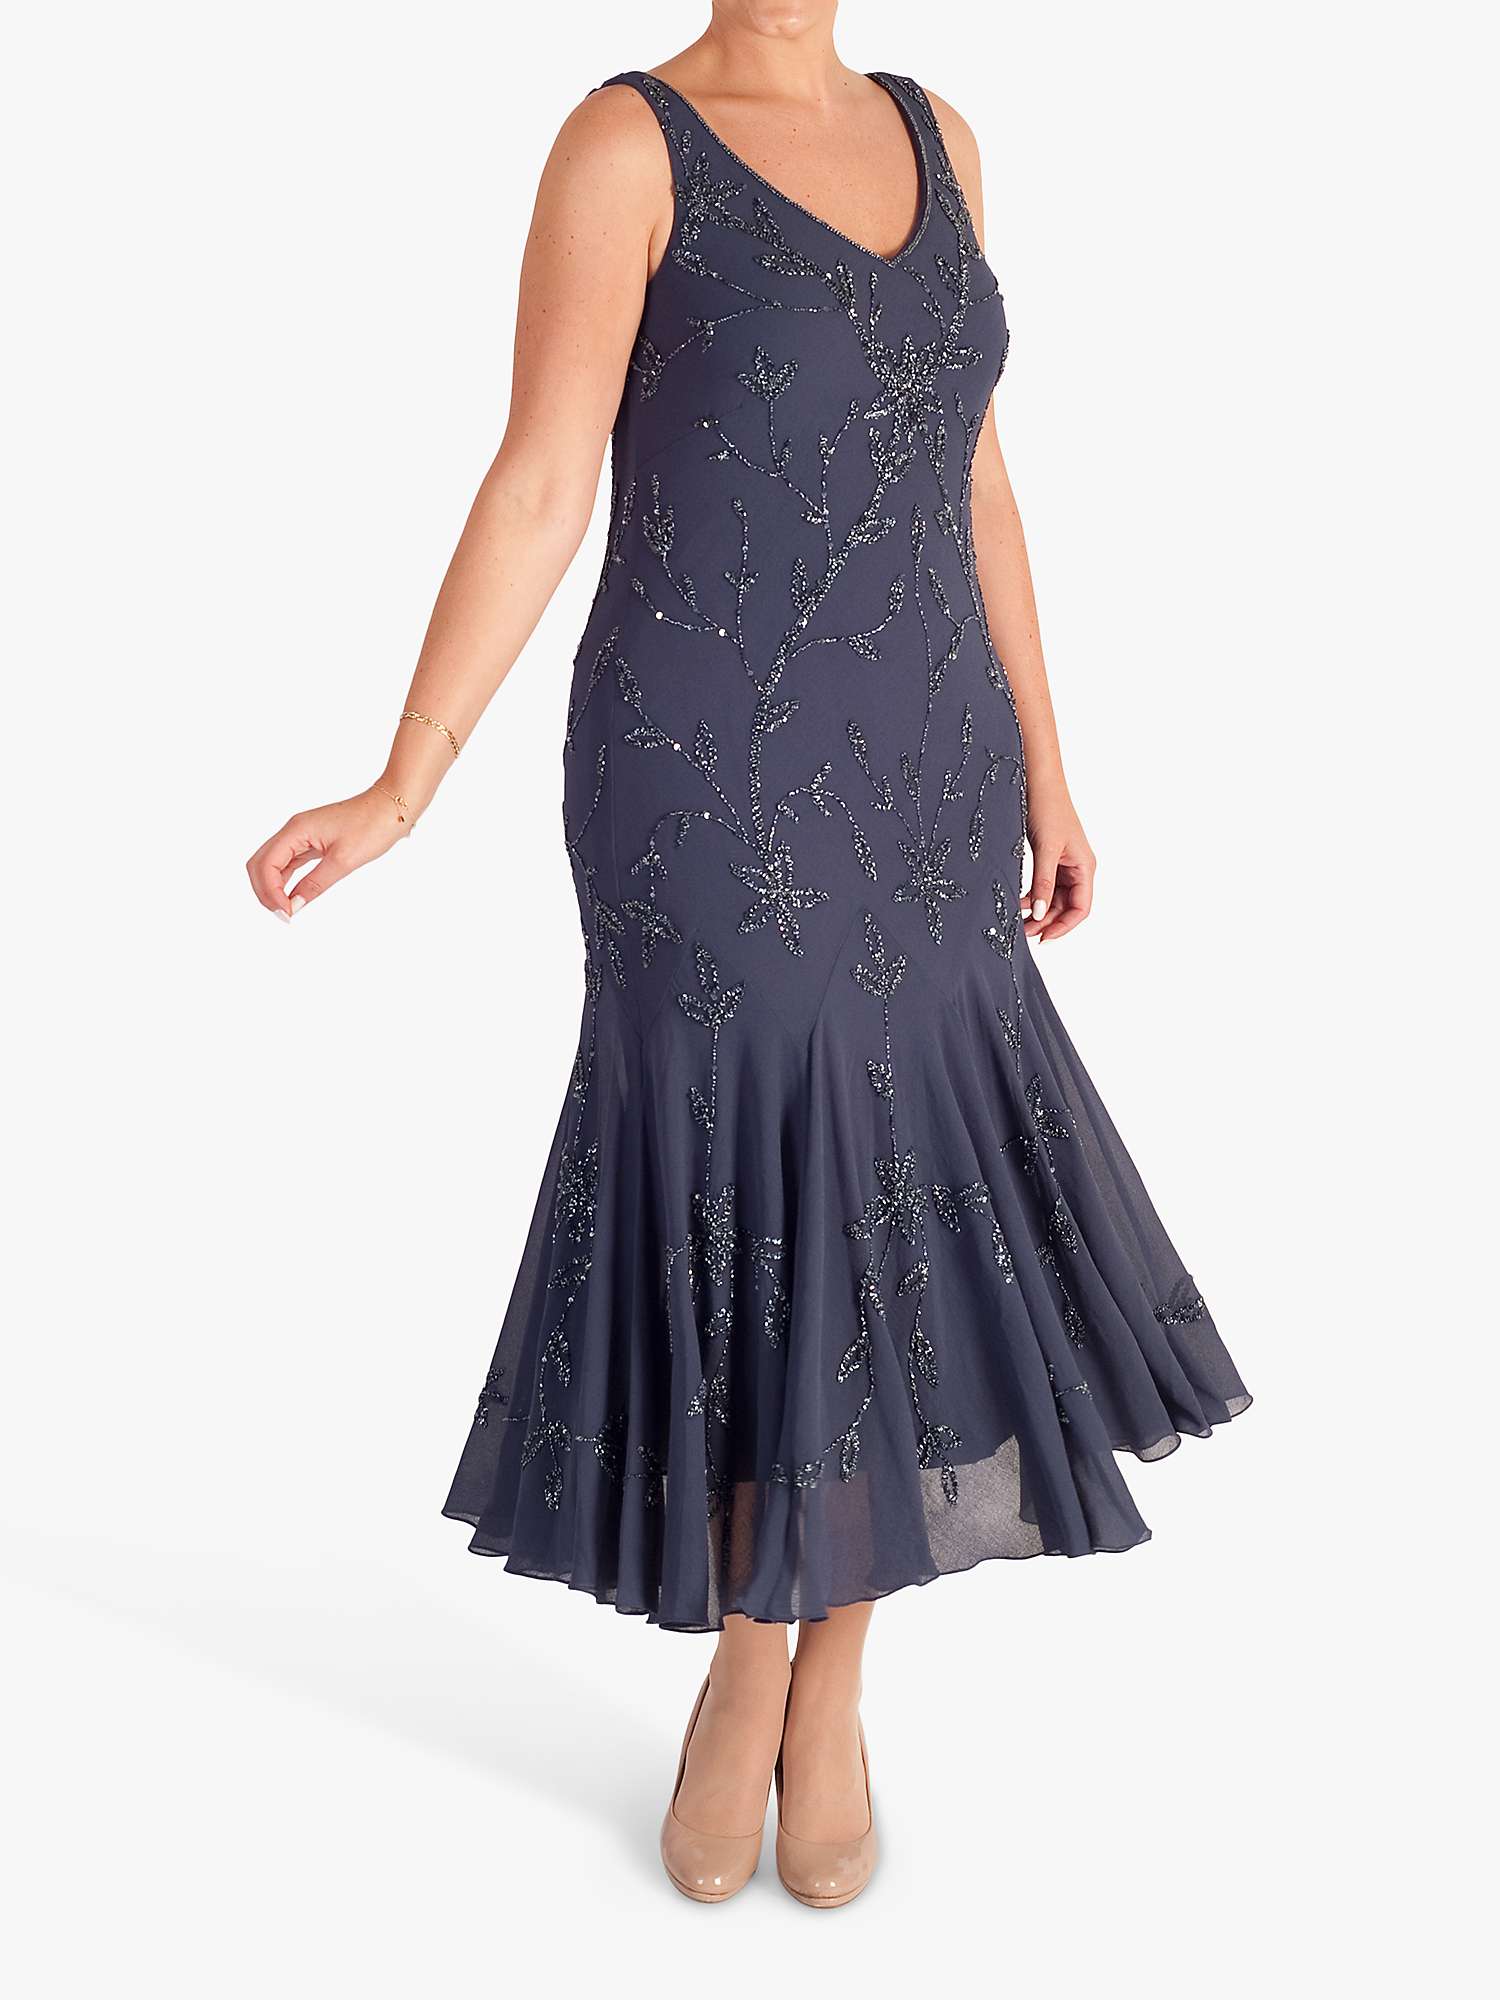 Buy chesca Floral Beaded Georgette Midi Dress, Violetta Online at johnlewis.com